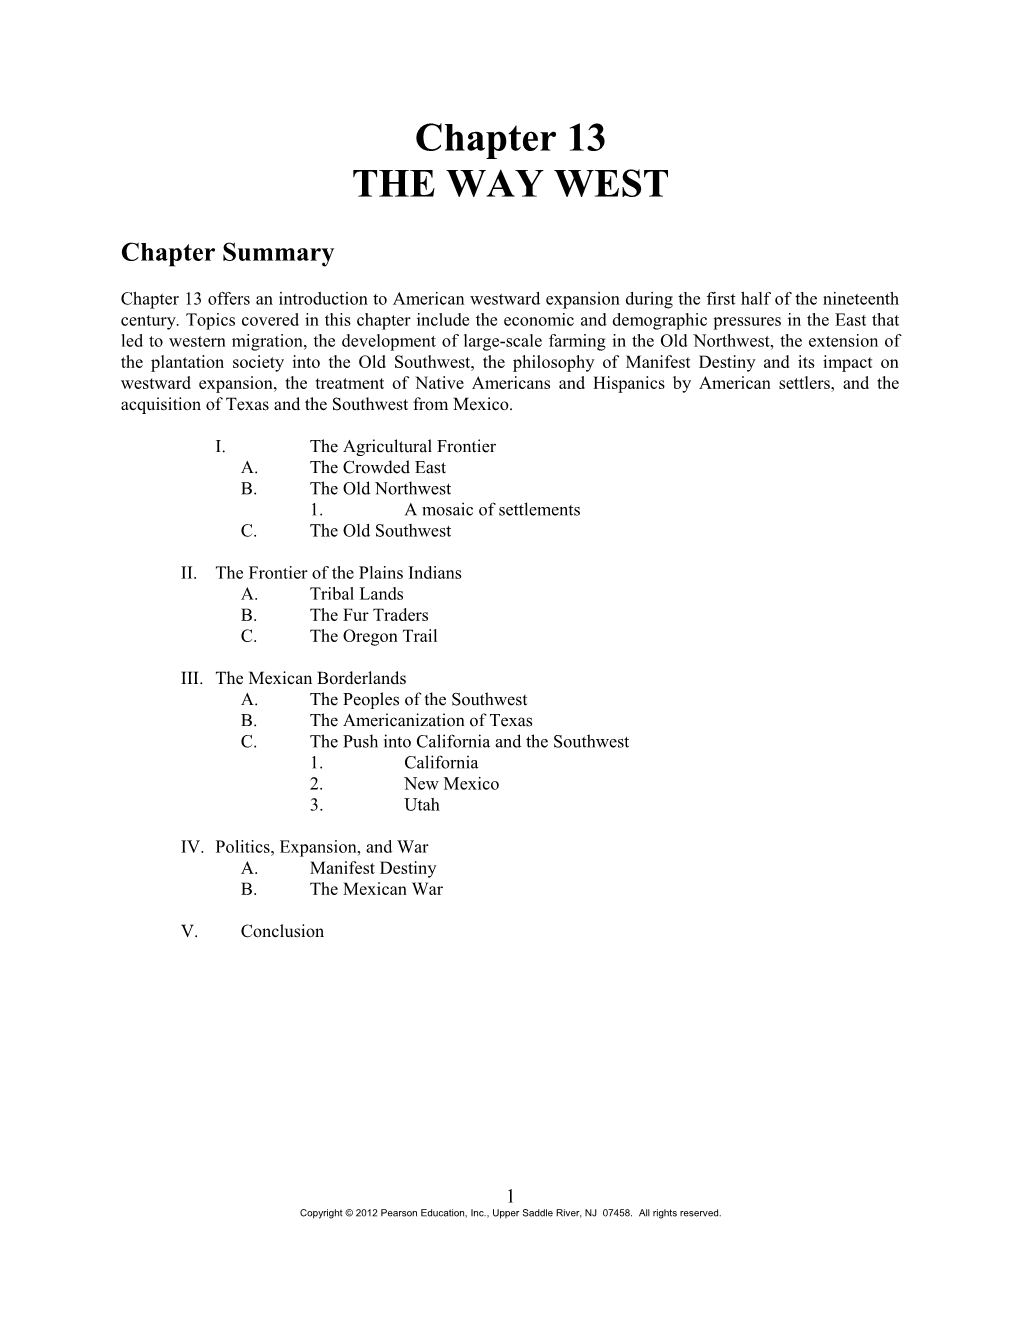 Chapter 12 the Way West